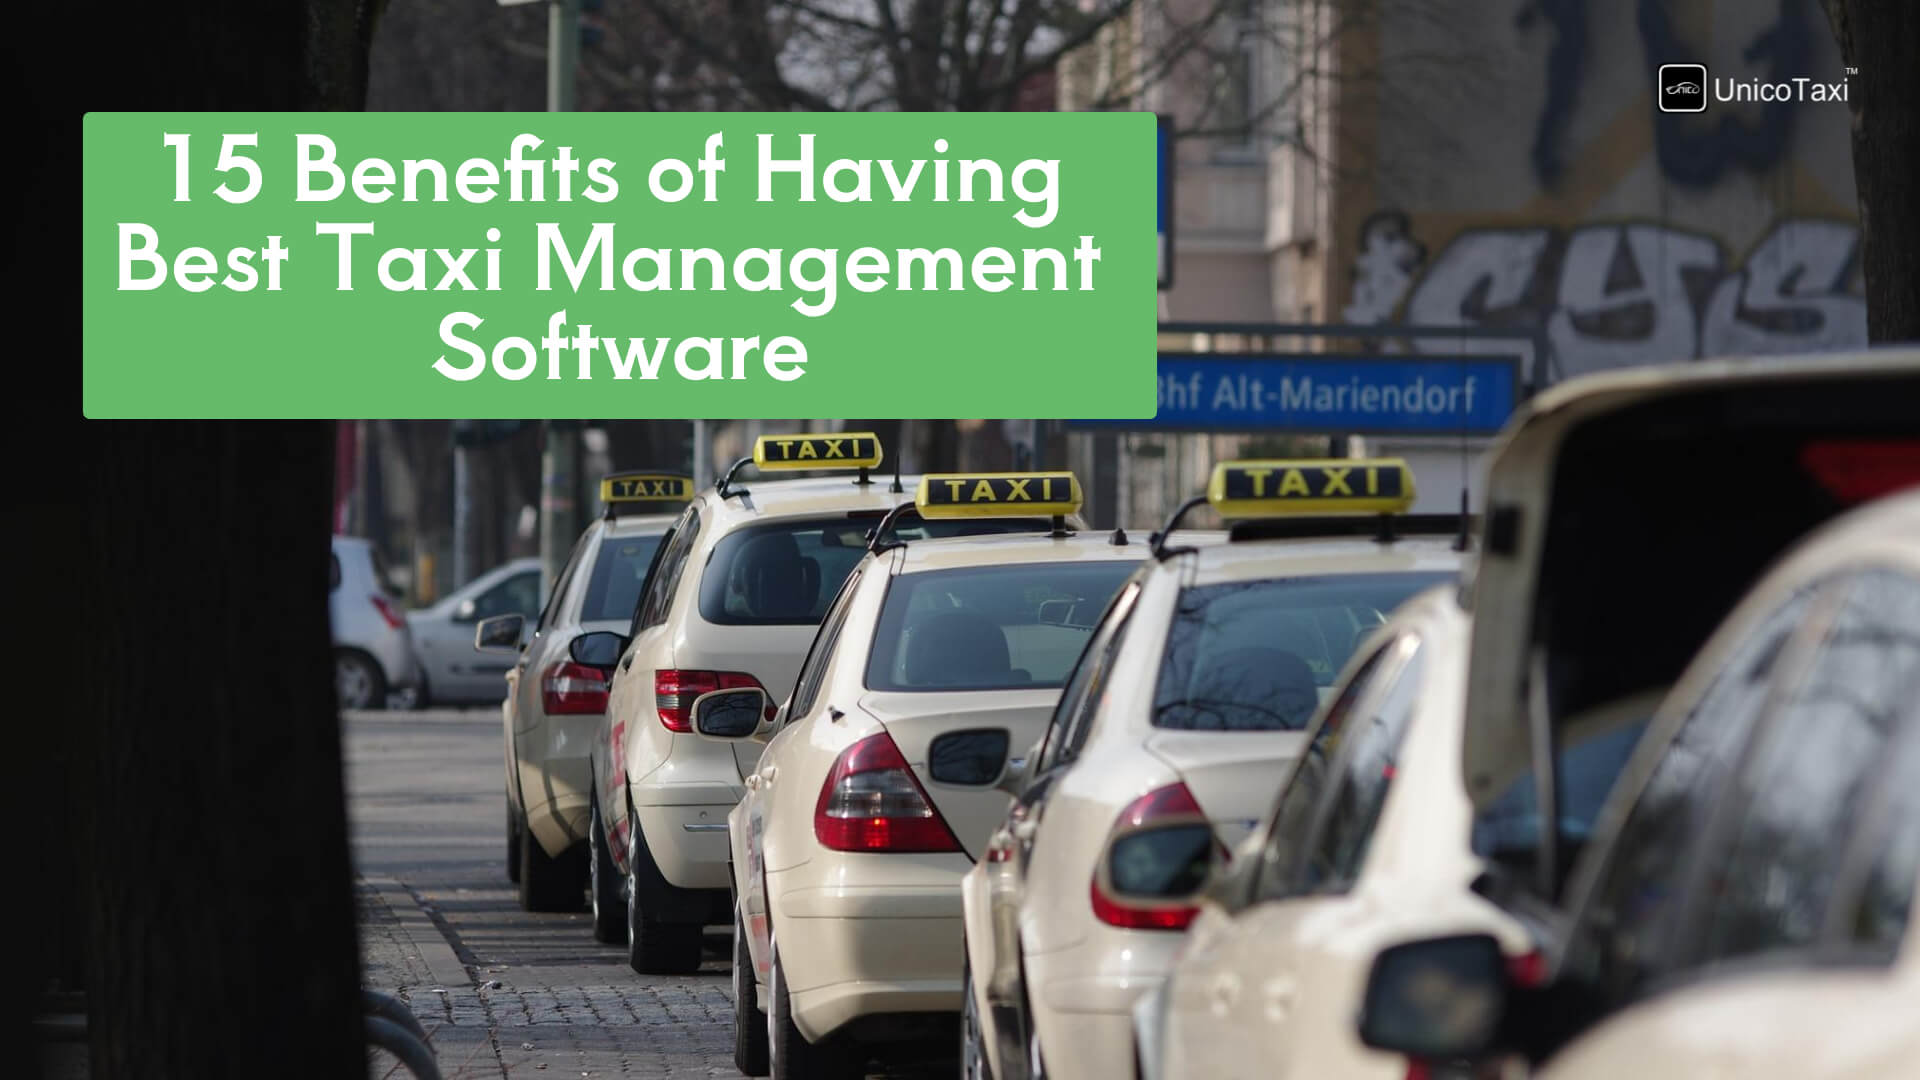 15 Benefits of Having Best Taxi Management Software